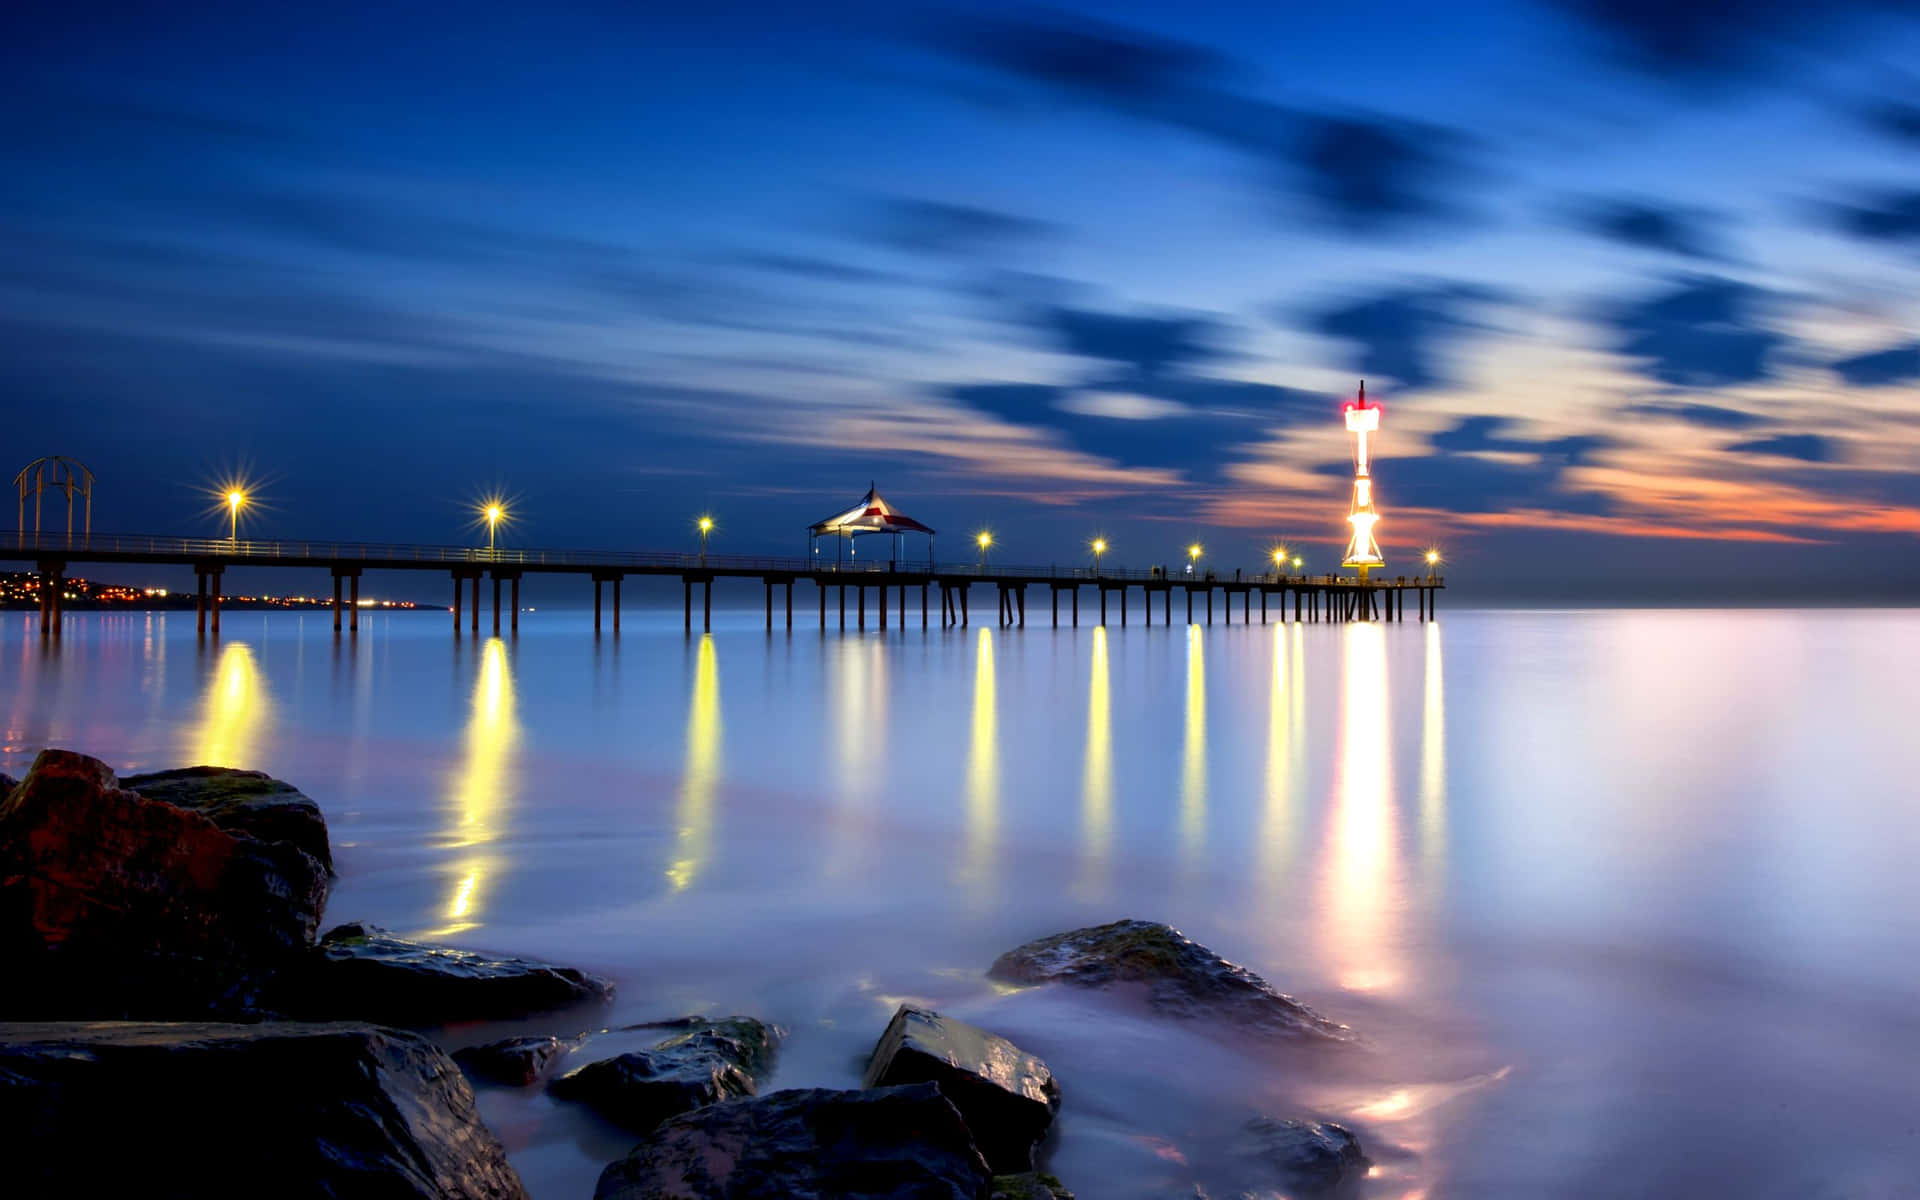 A Pier With Rocks And Water At Dusk